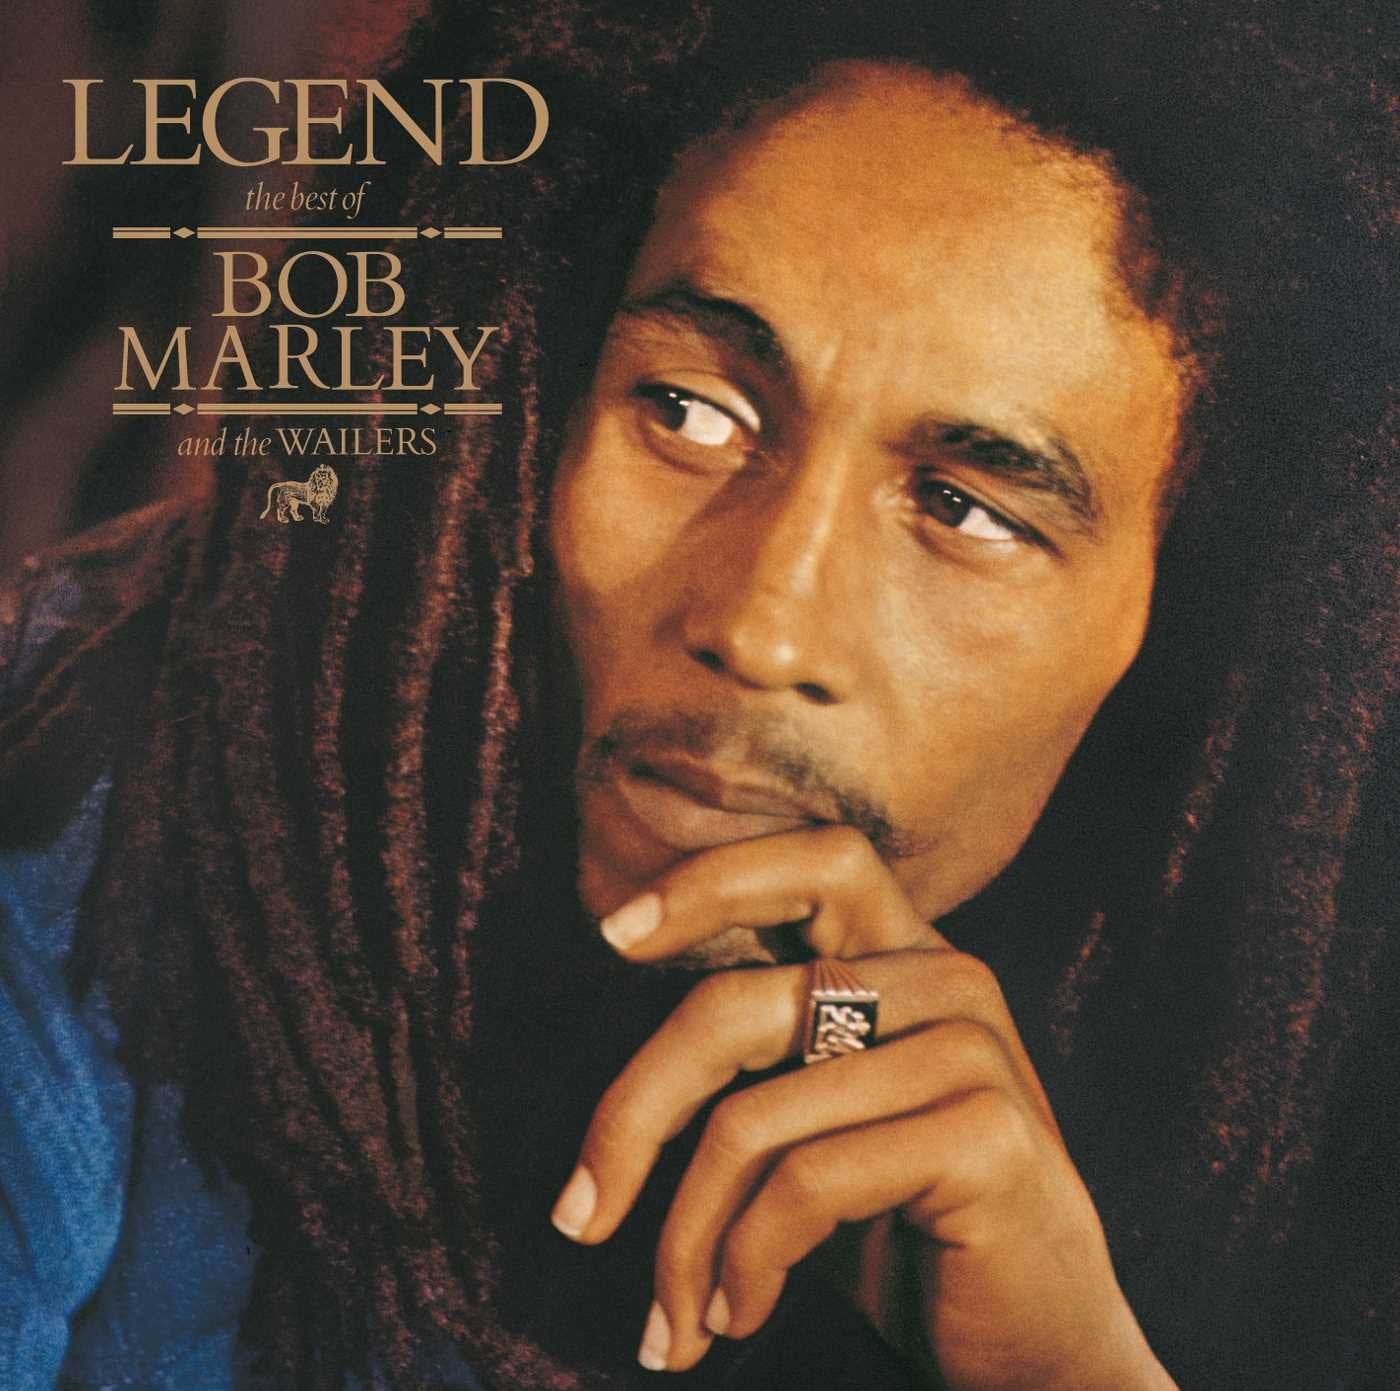 Bob Marley and the Wailers- Legend, The Best Of